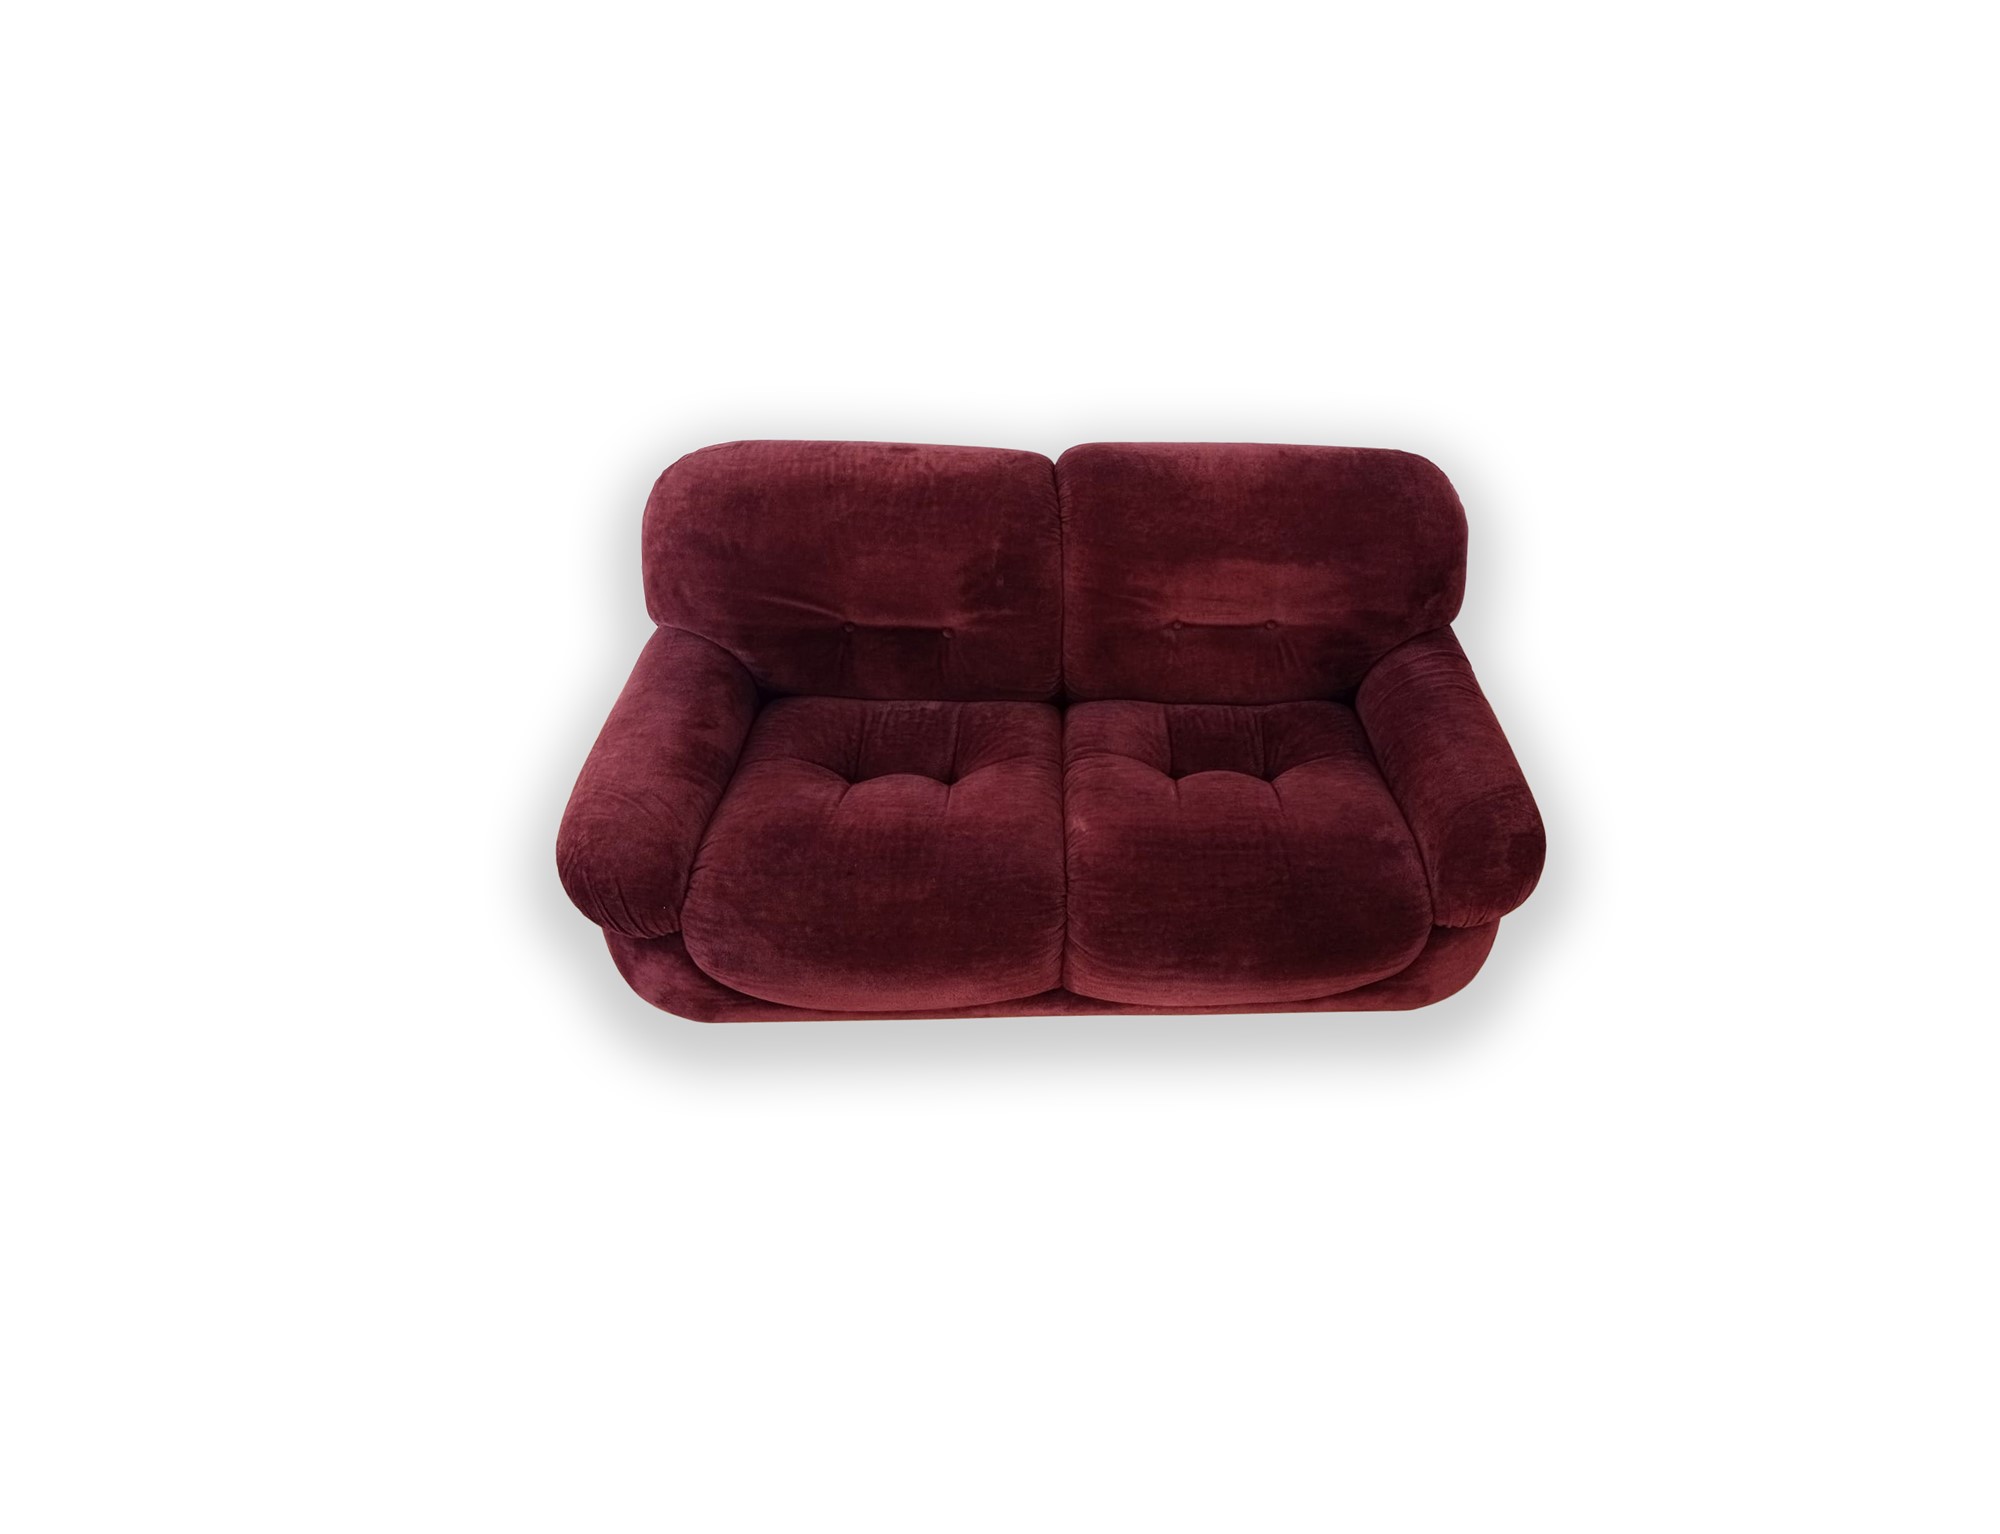 Two seater Sapporo sofa - Image 4 of 11